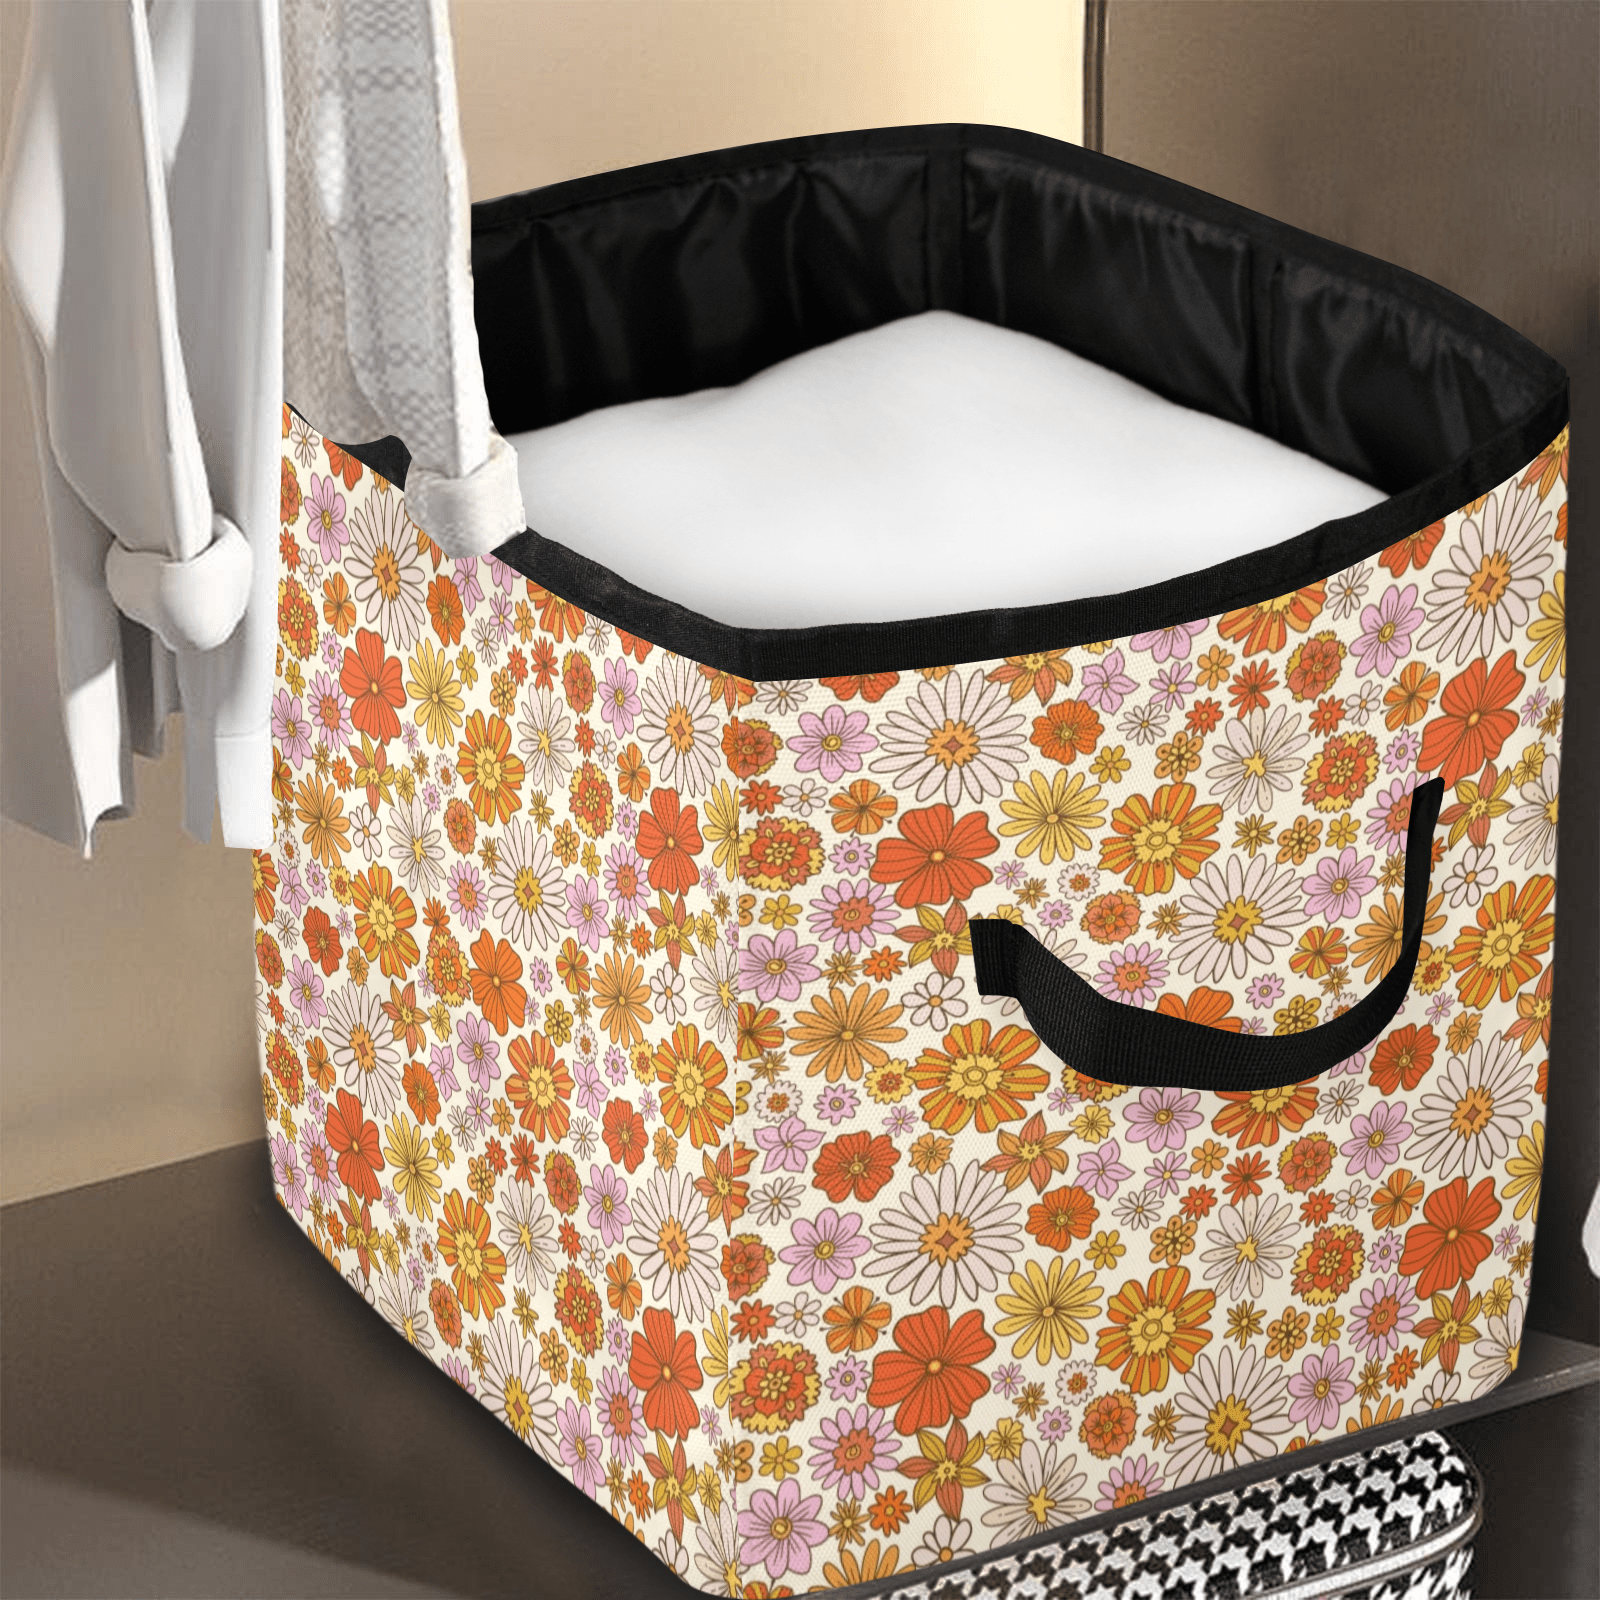 Modern Fabric Storage Bins, For Blankets, Pet Toys, Books, And More